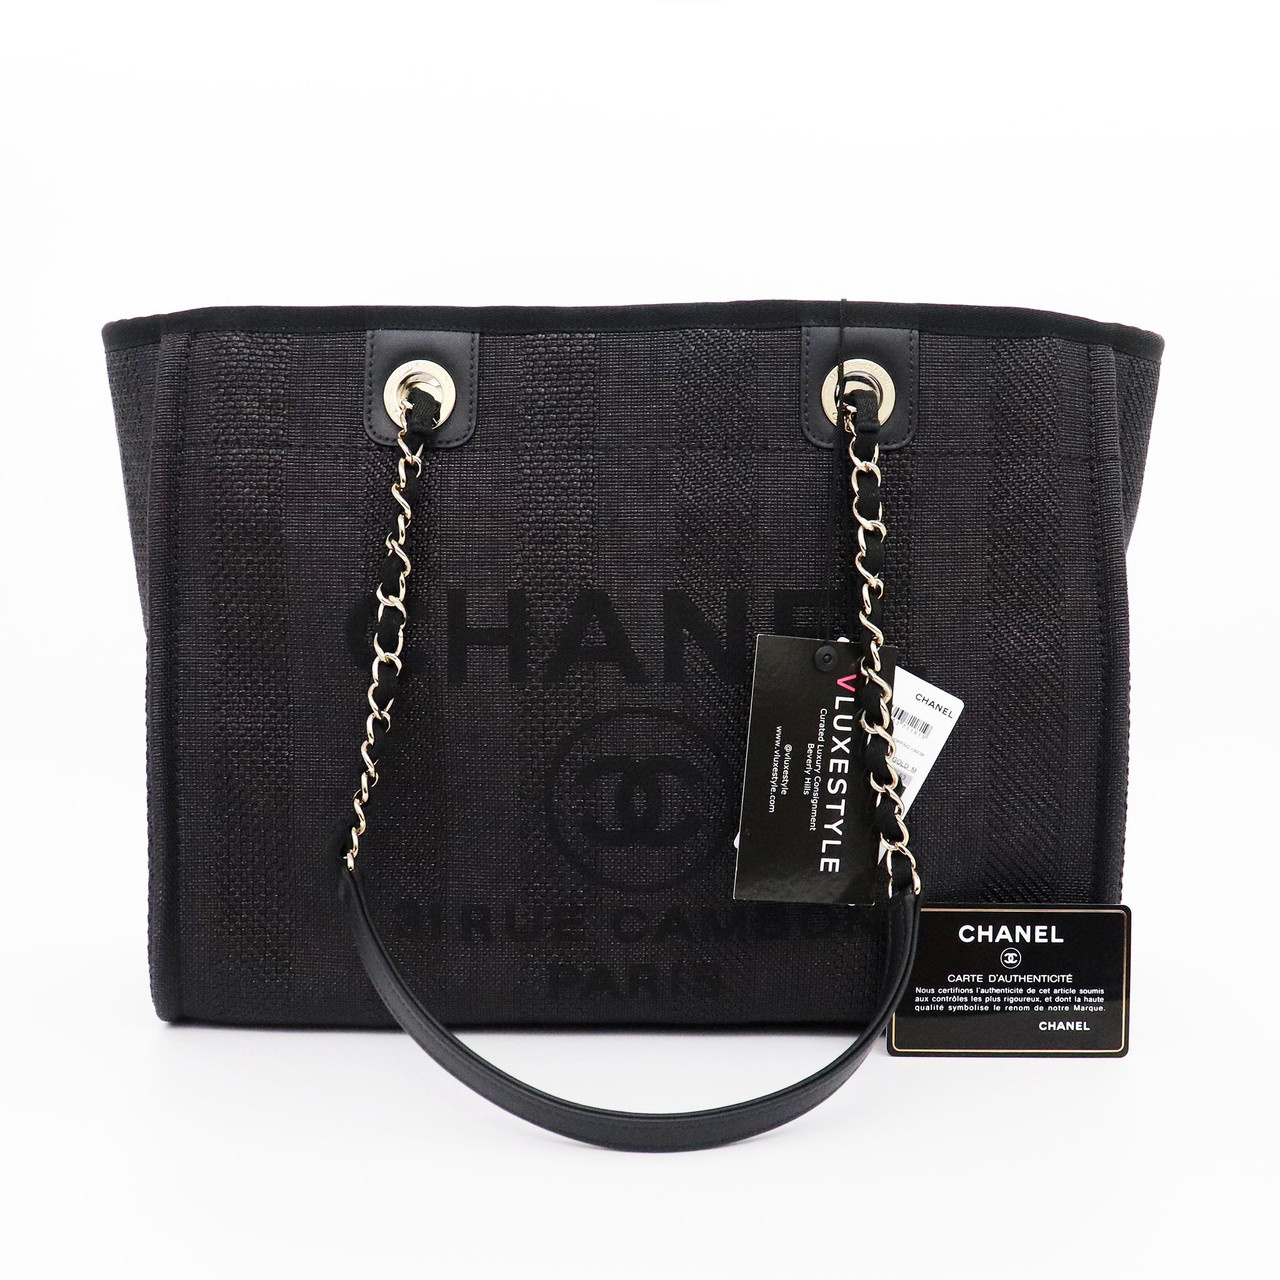 Chanel NEW 2020 Black Mixed Fibers Large Deauville Tote Bag